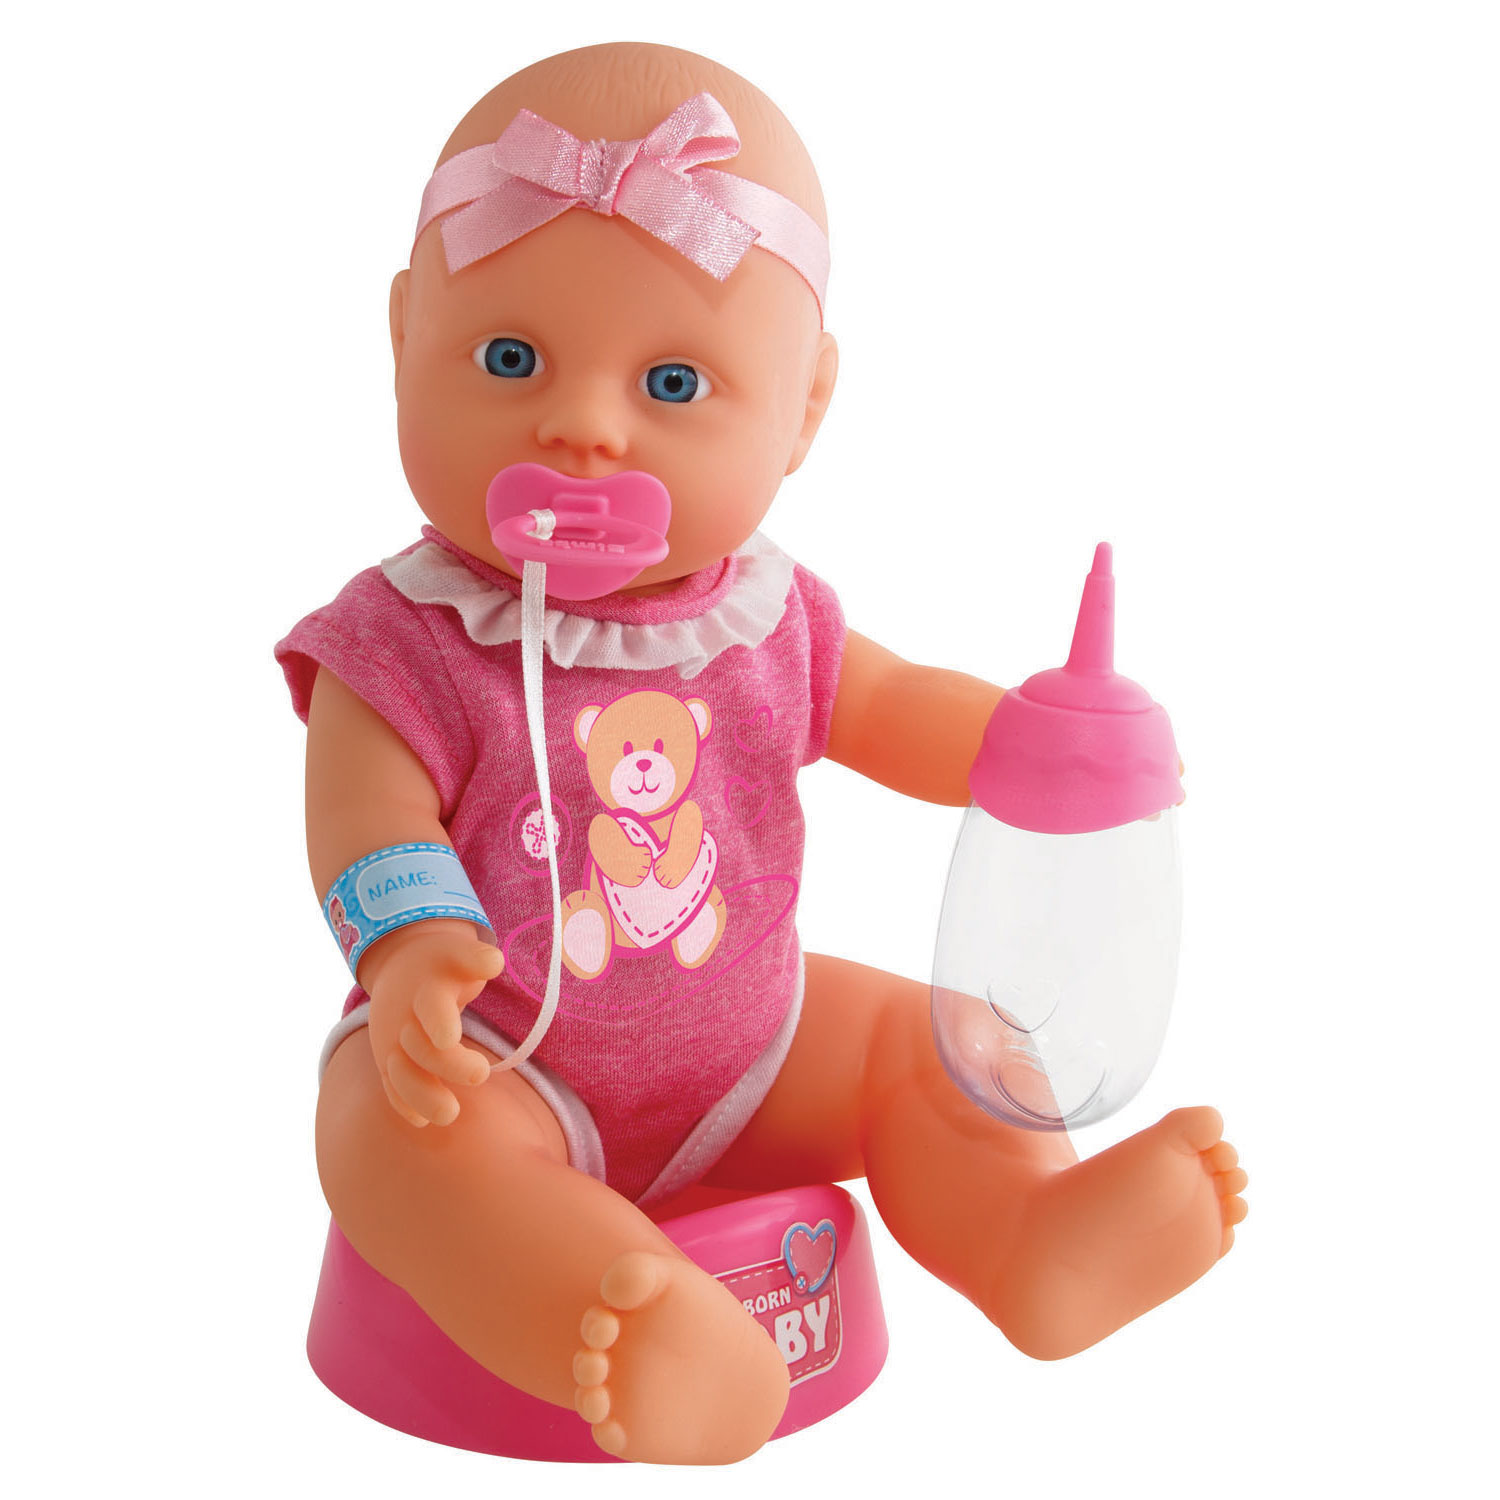 knop opwinding Bot New Born Baby Pop met Accessoires, 4dlg. | Thimble Toys